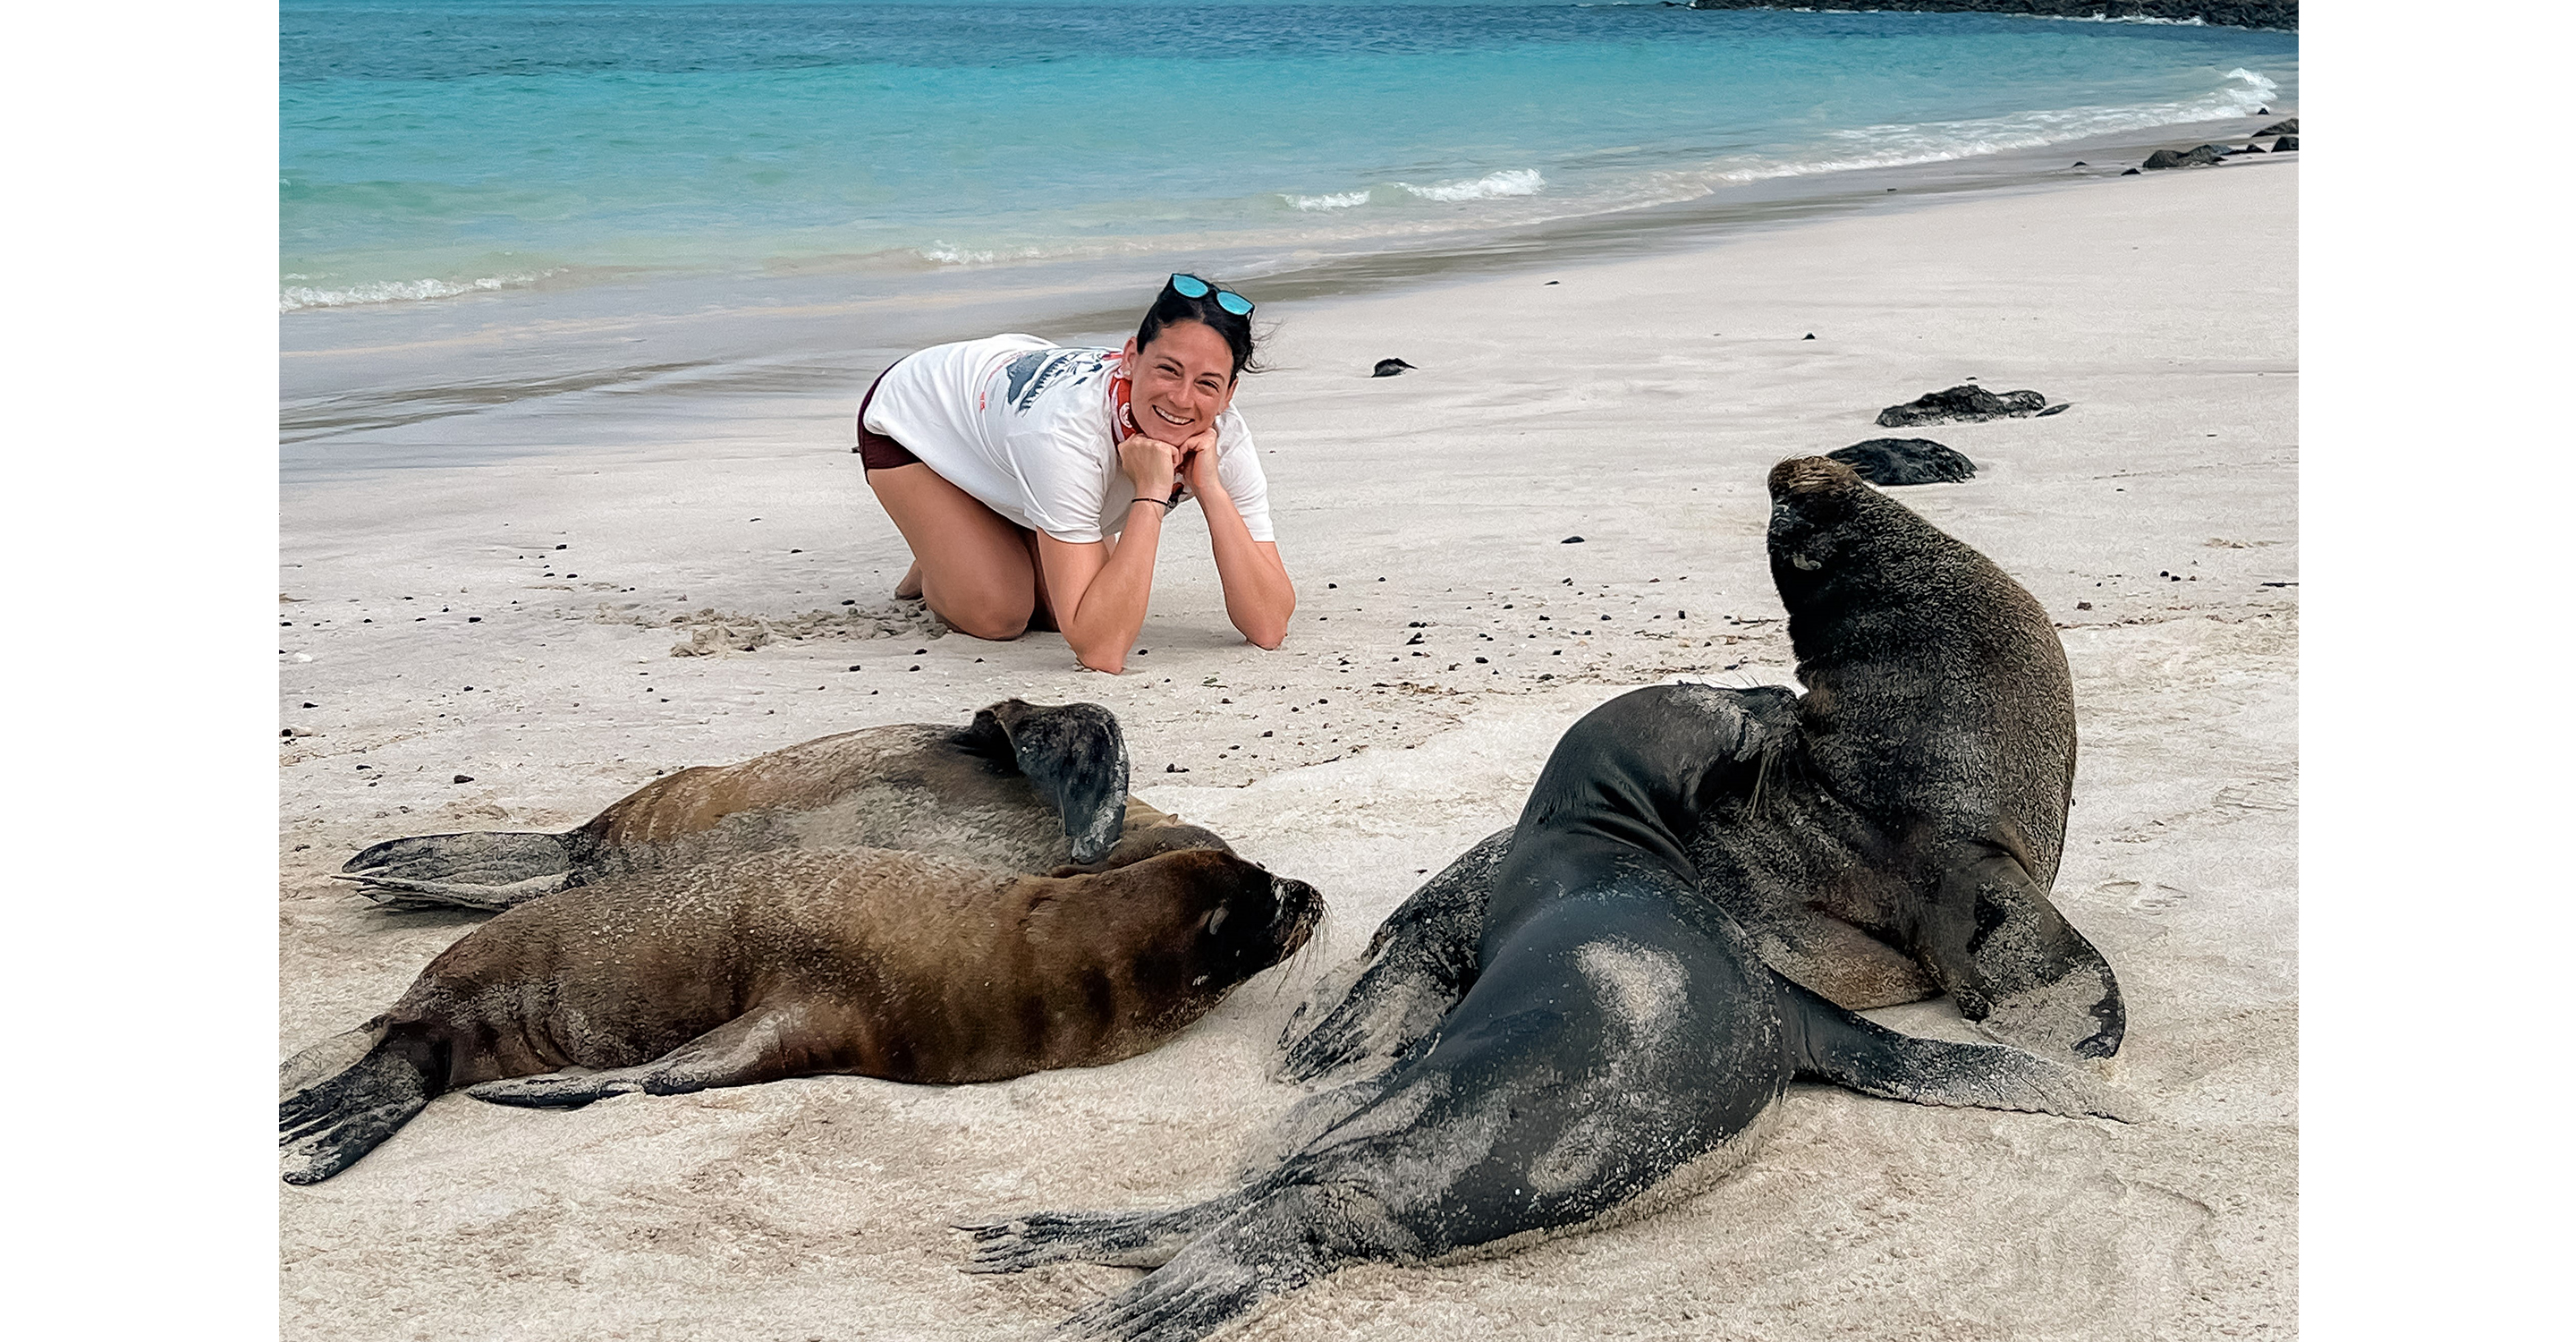 Saying hello to the sea lions of Santa Fe Island in the Galapagos.